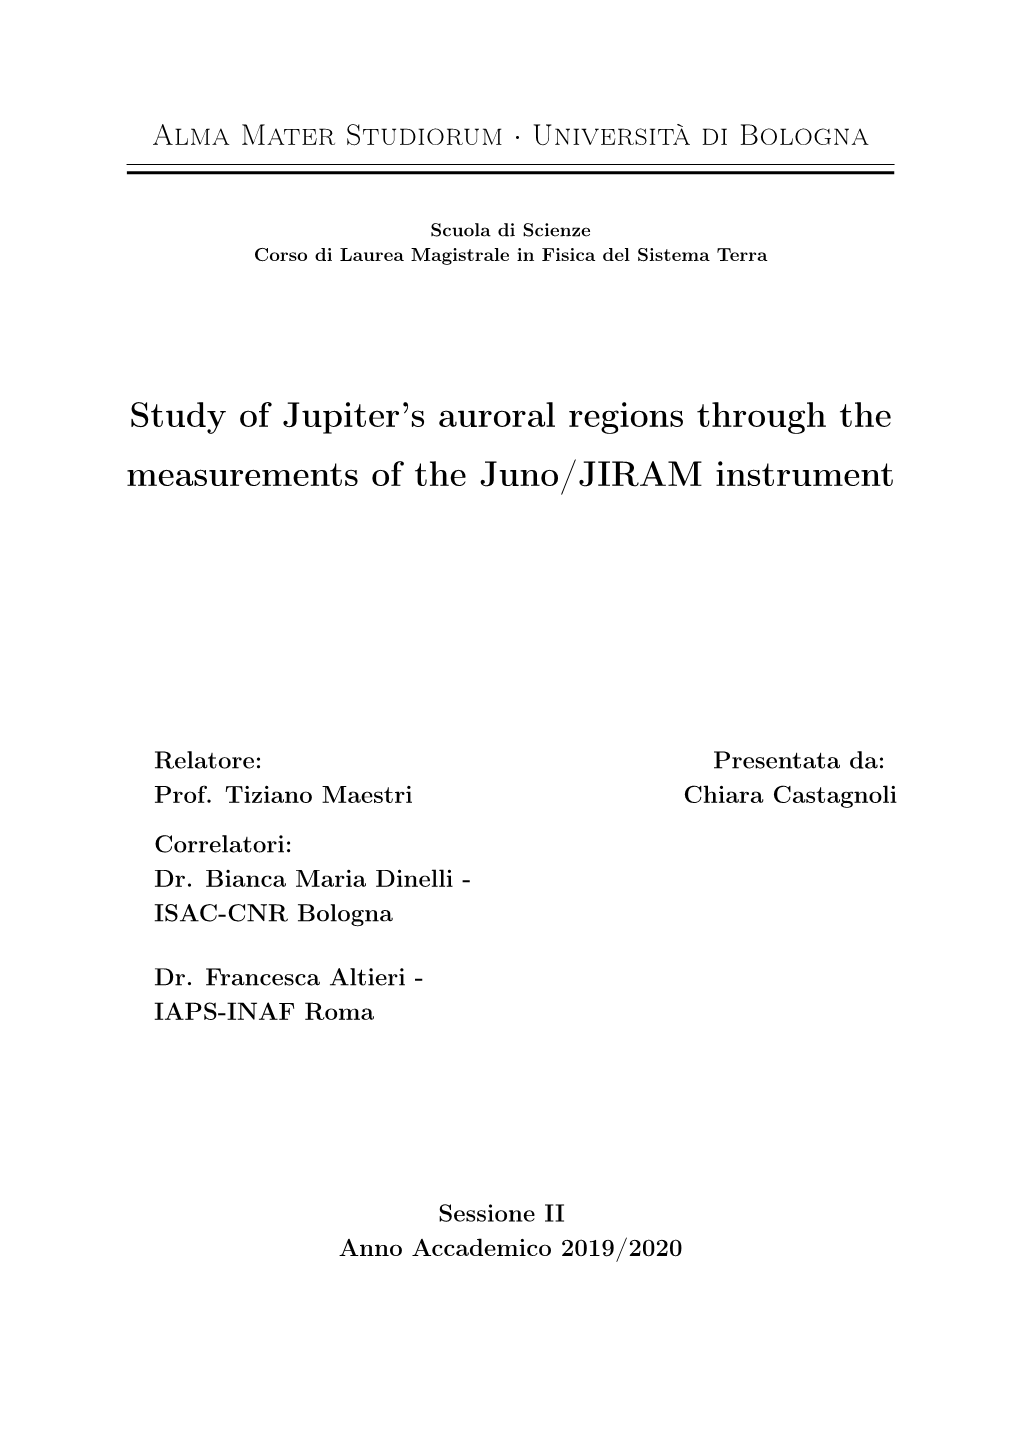 Study of Jupiter's Auroral Regions Through the Measurements of The